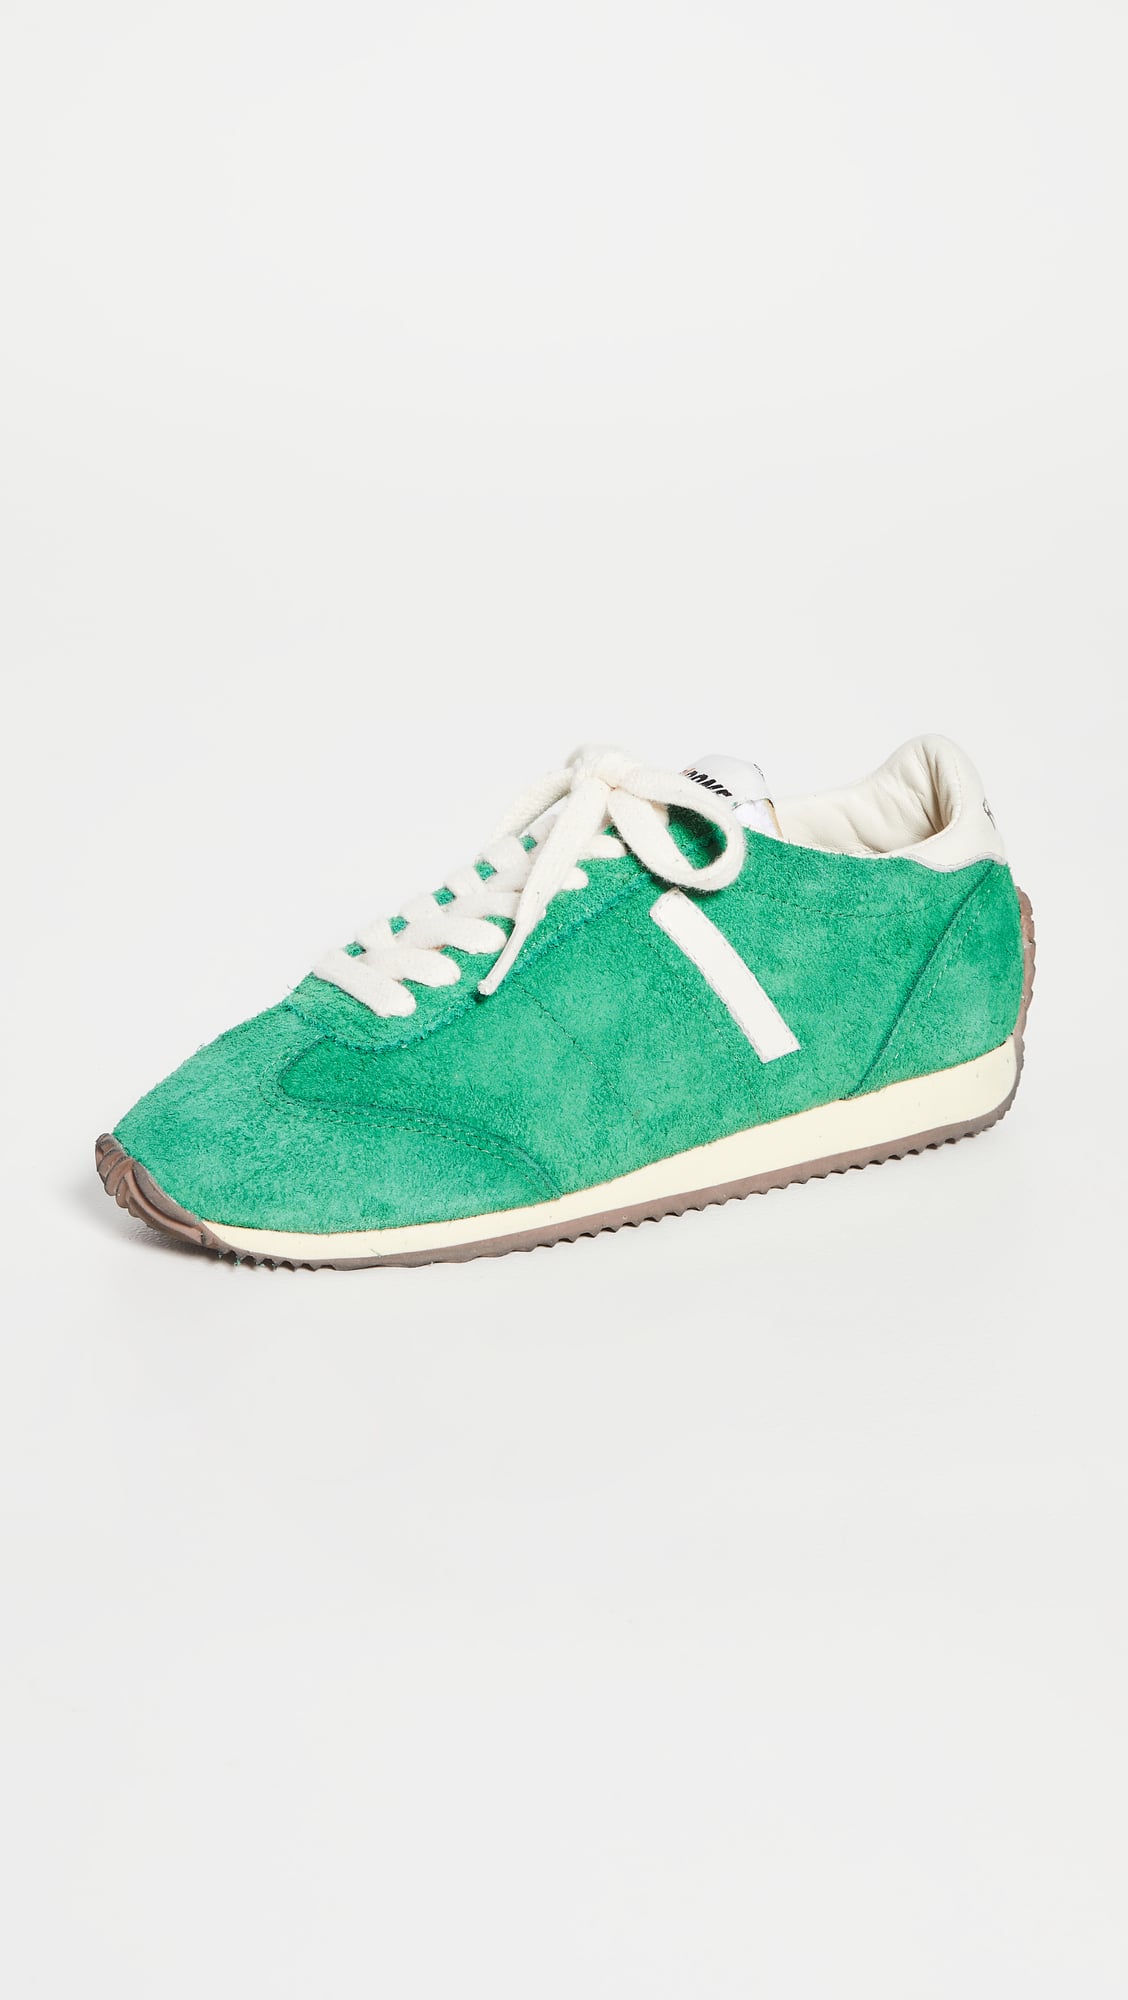 70s Sneakers | vlr.eng.br